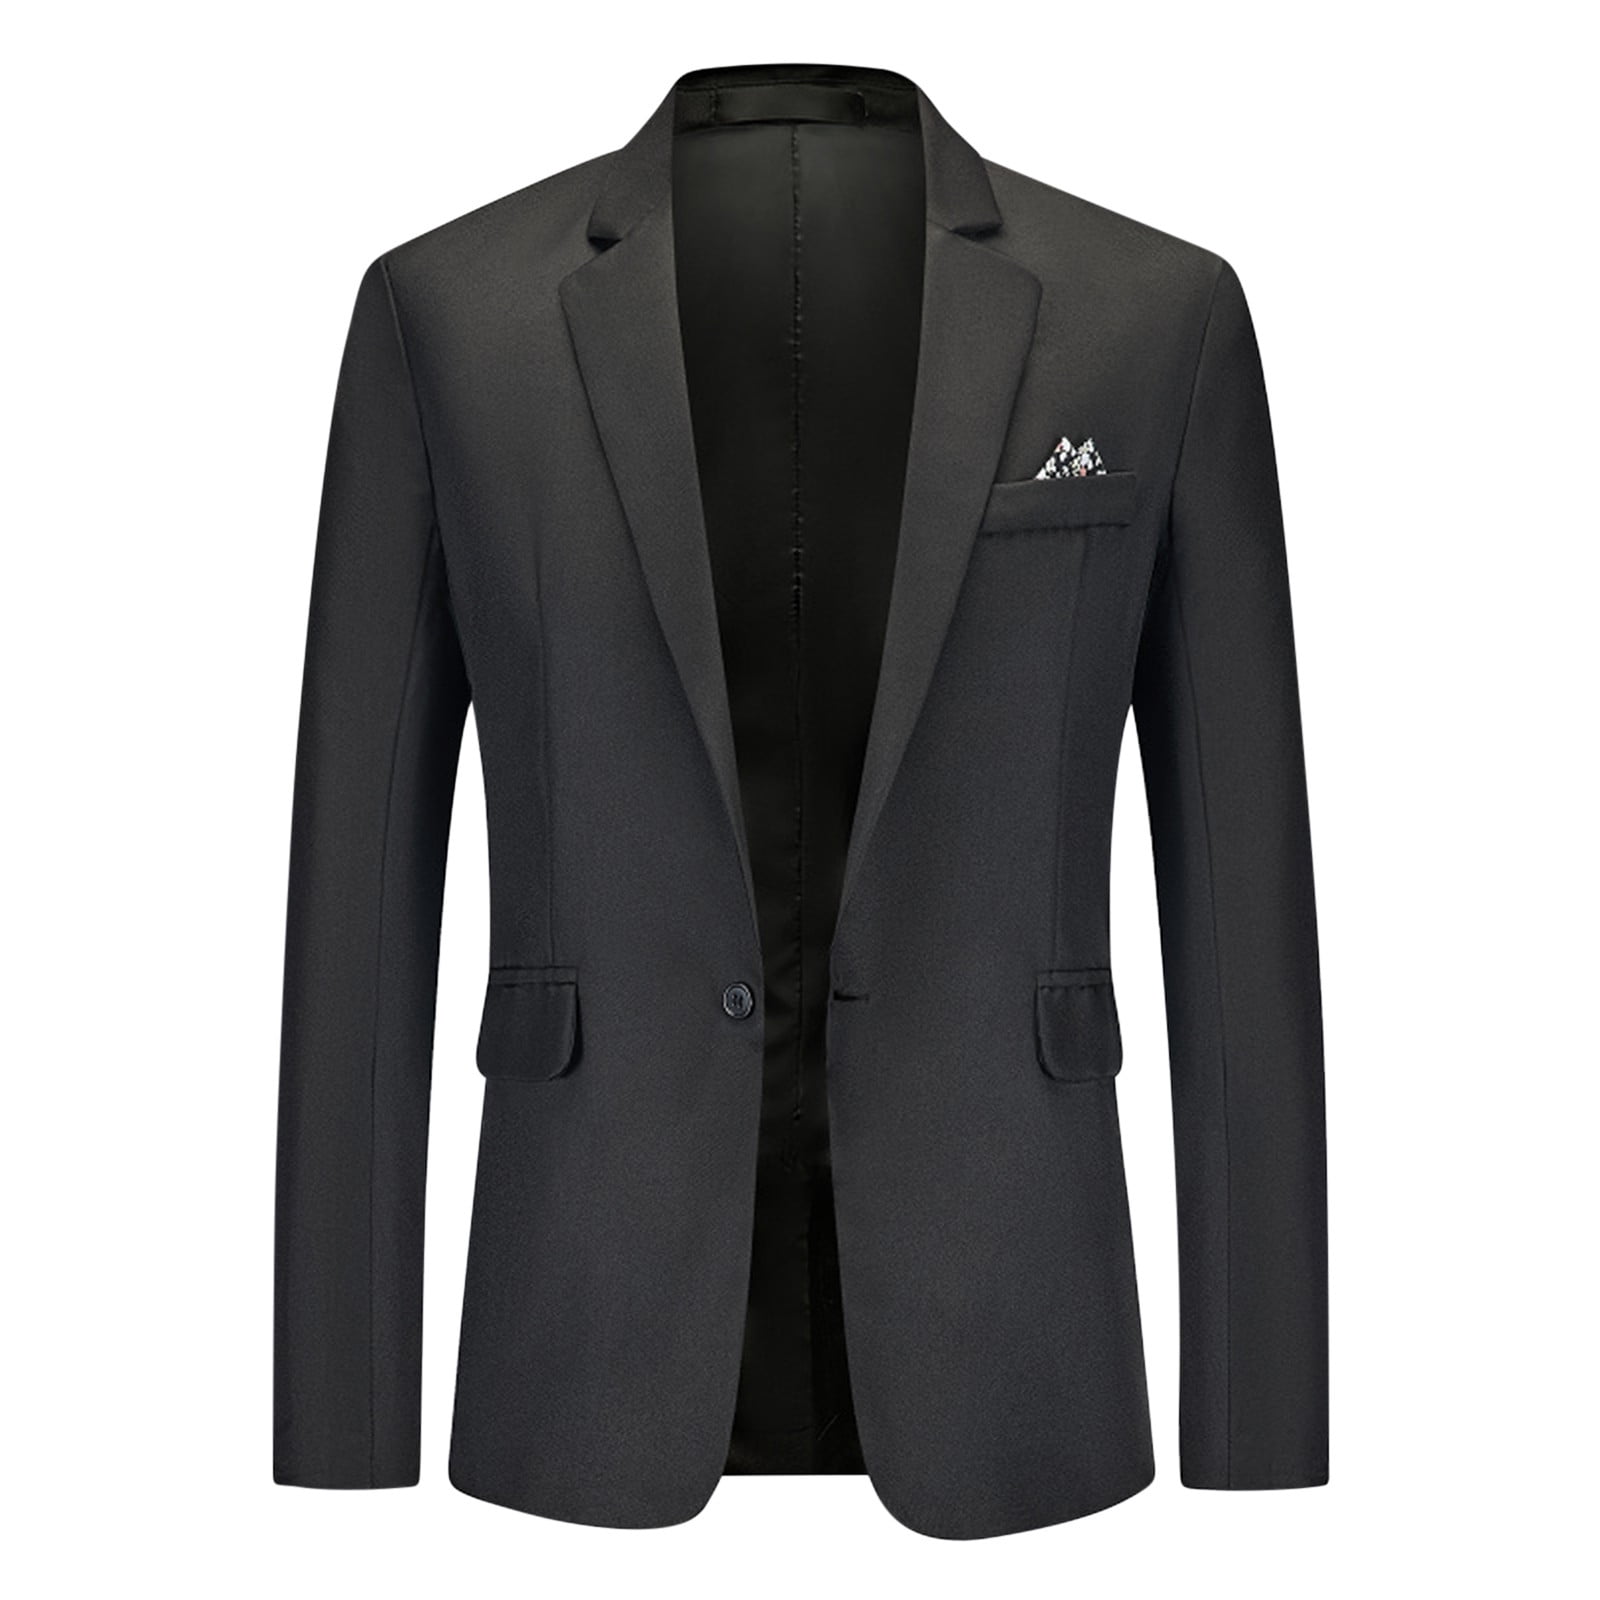 How to tailor a suit jacket?